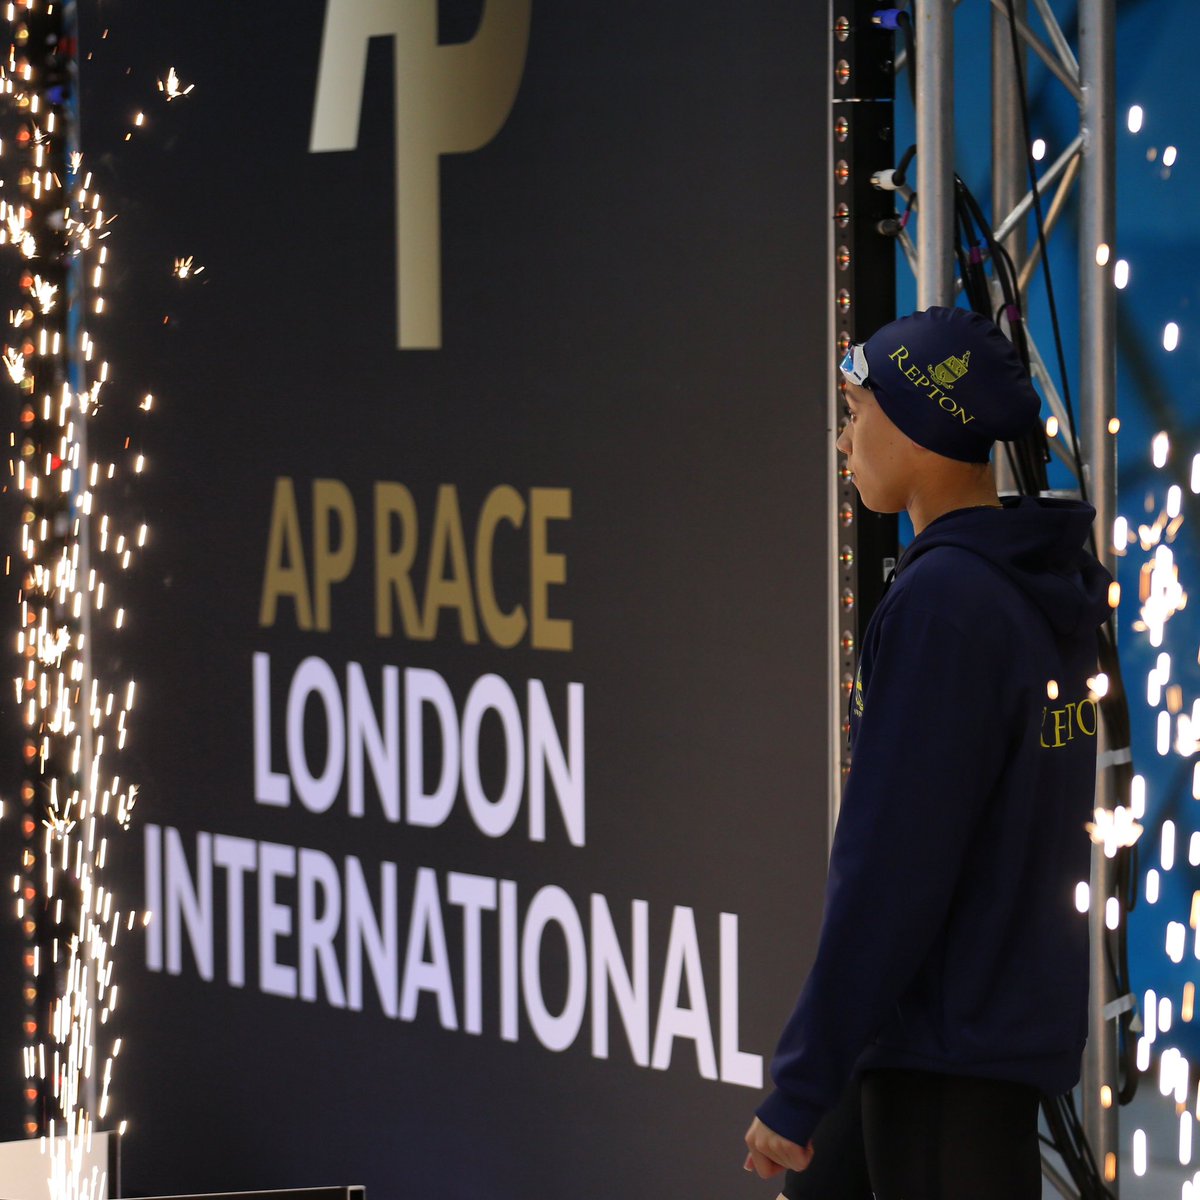 ✨Well done to all of our swimmers who raced this weekend and thank you for AP Race for putting on a fantastic international event for swimmers to experience!🙏🏻#ReptonSwimming⚡️
@APRaceEvents